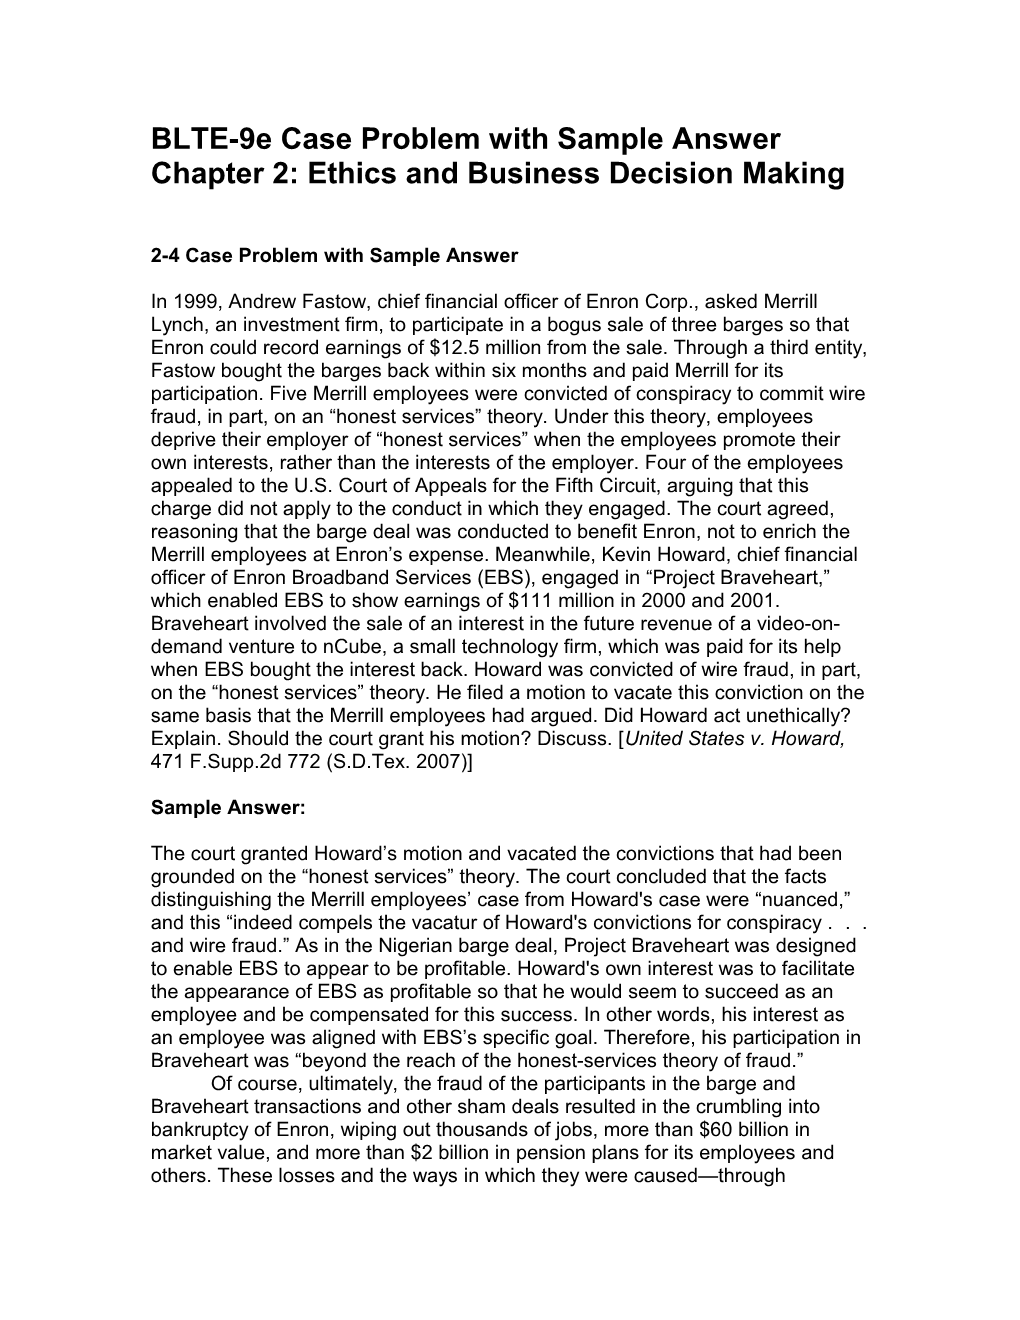 Chapter 4 - Constitutional Authority to Regulate Business s1